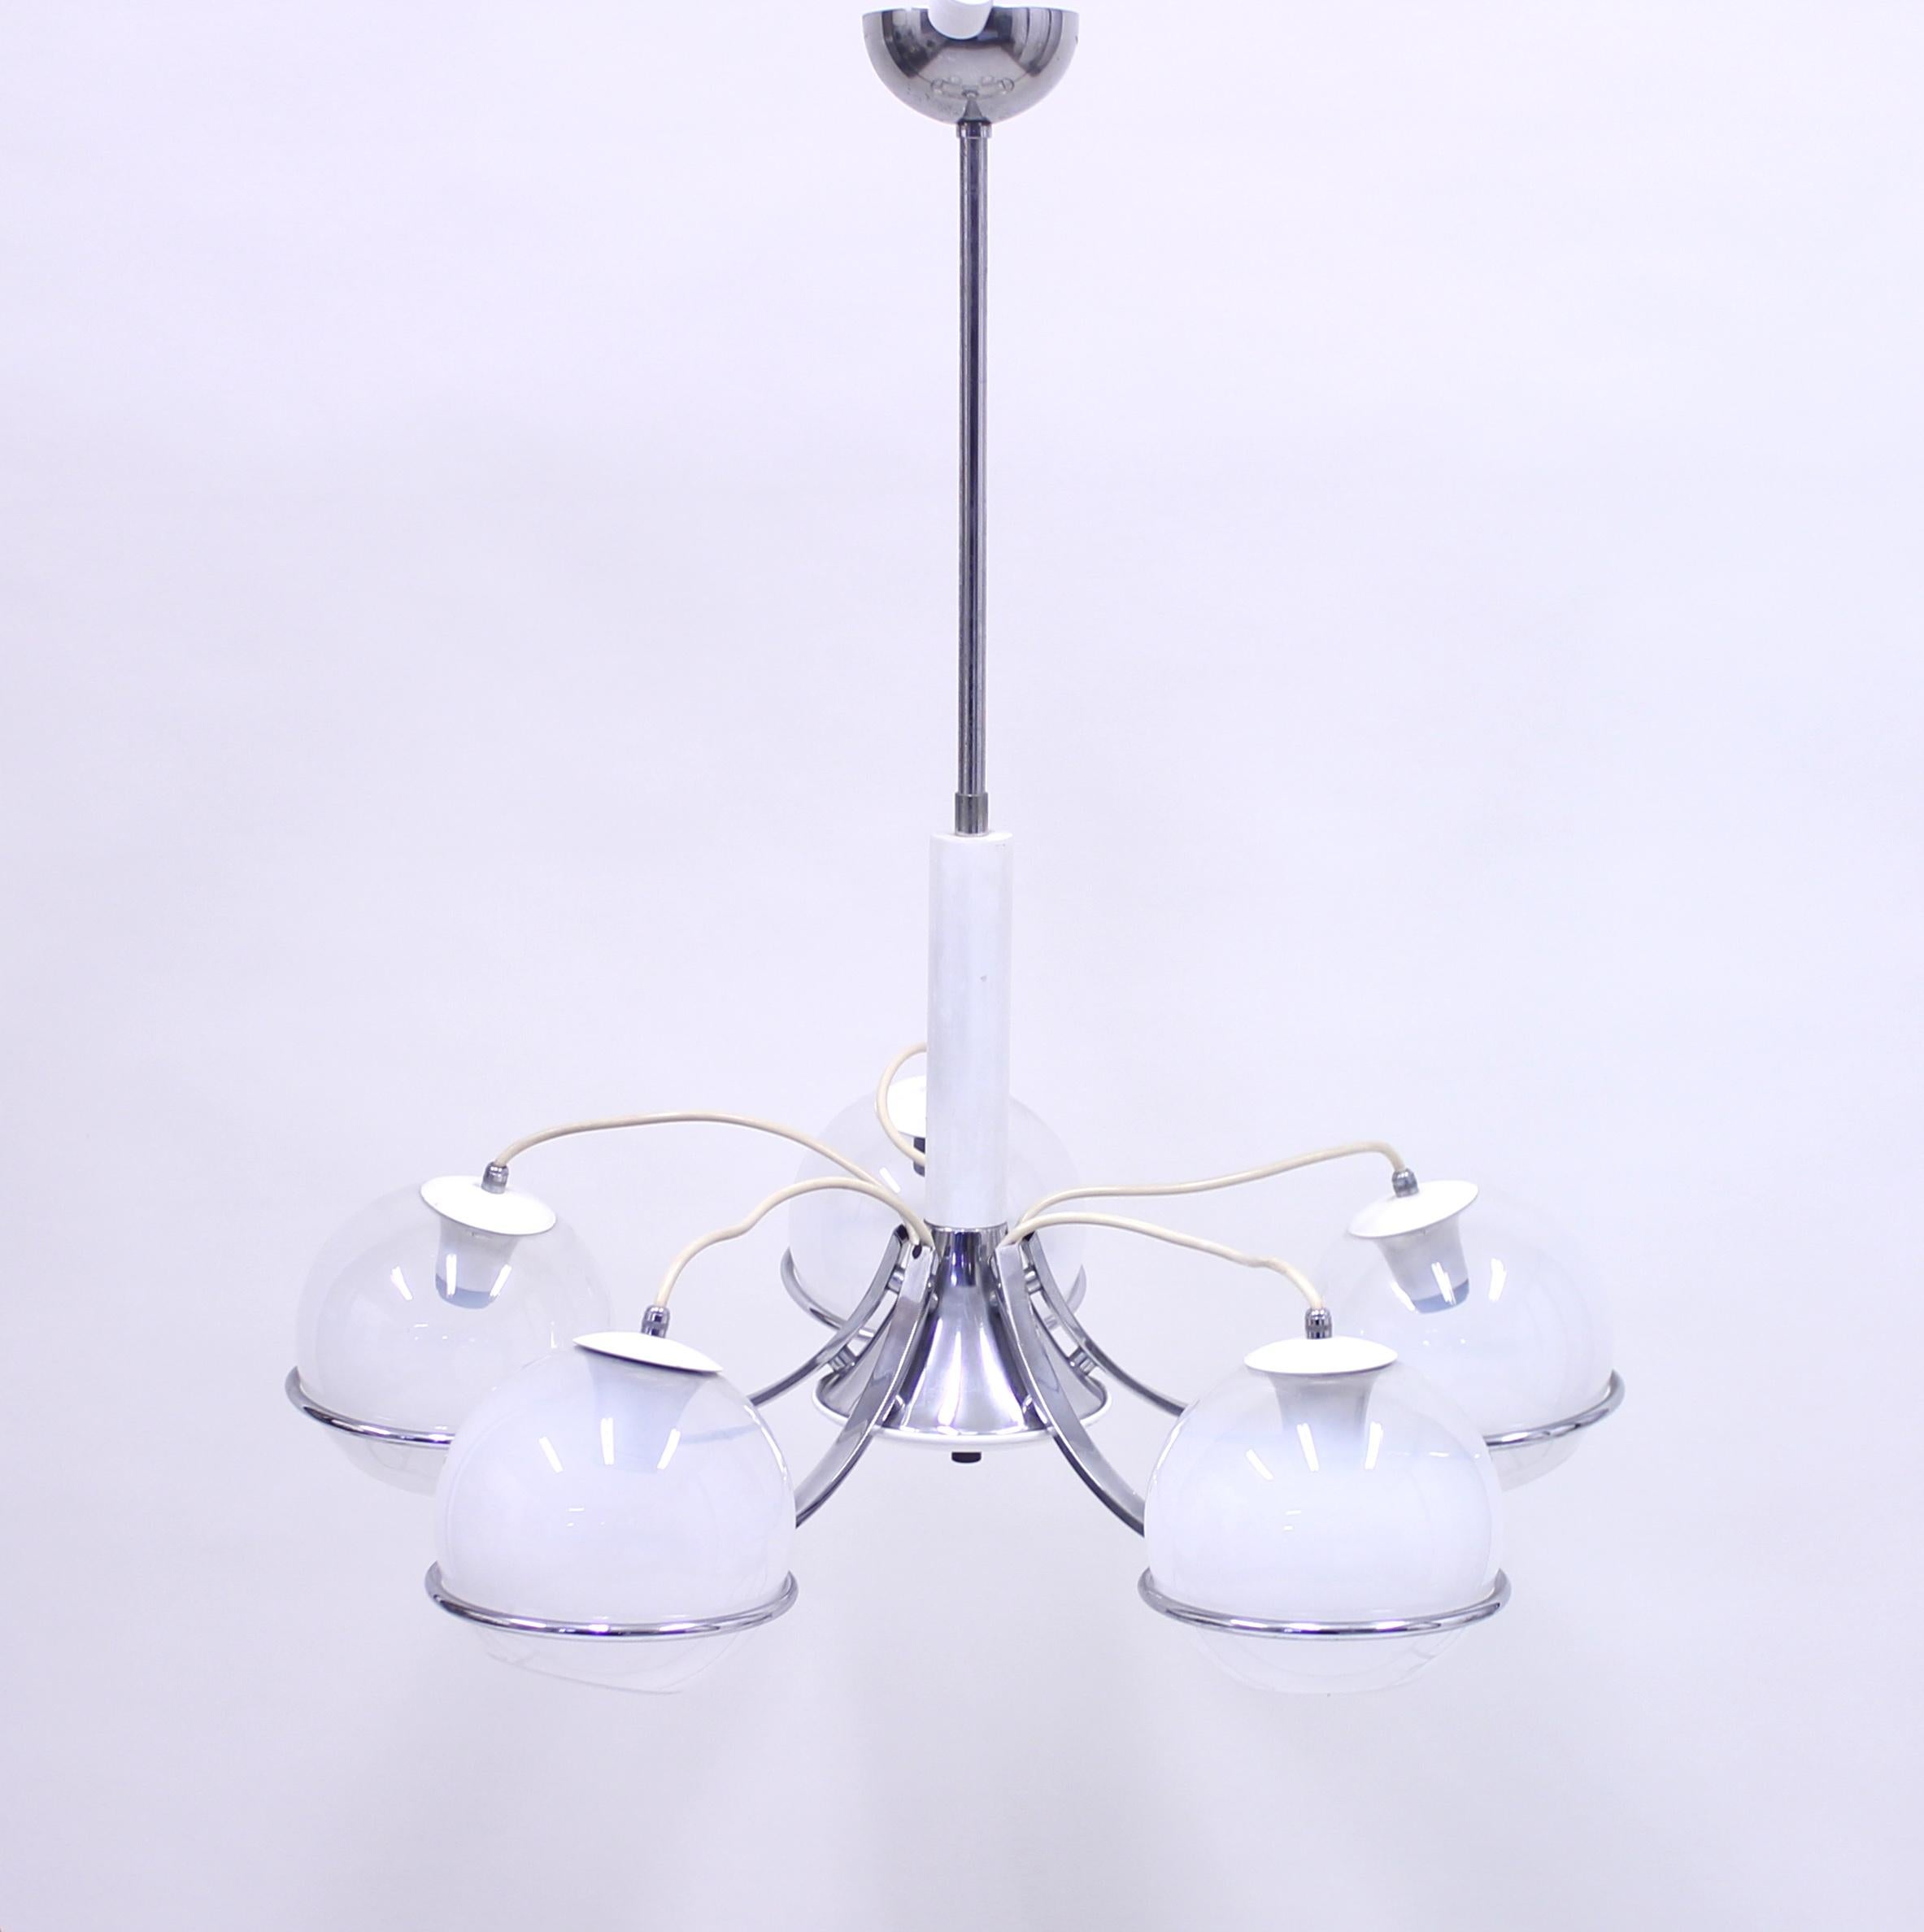 Late 20th Century Italian Ceiling Lamp Attributed to Gino Sarfatti, 1960s For Sale